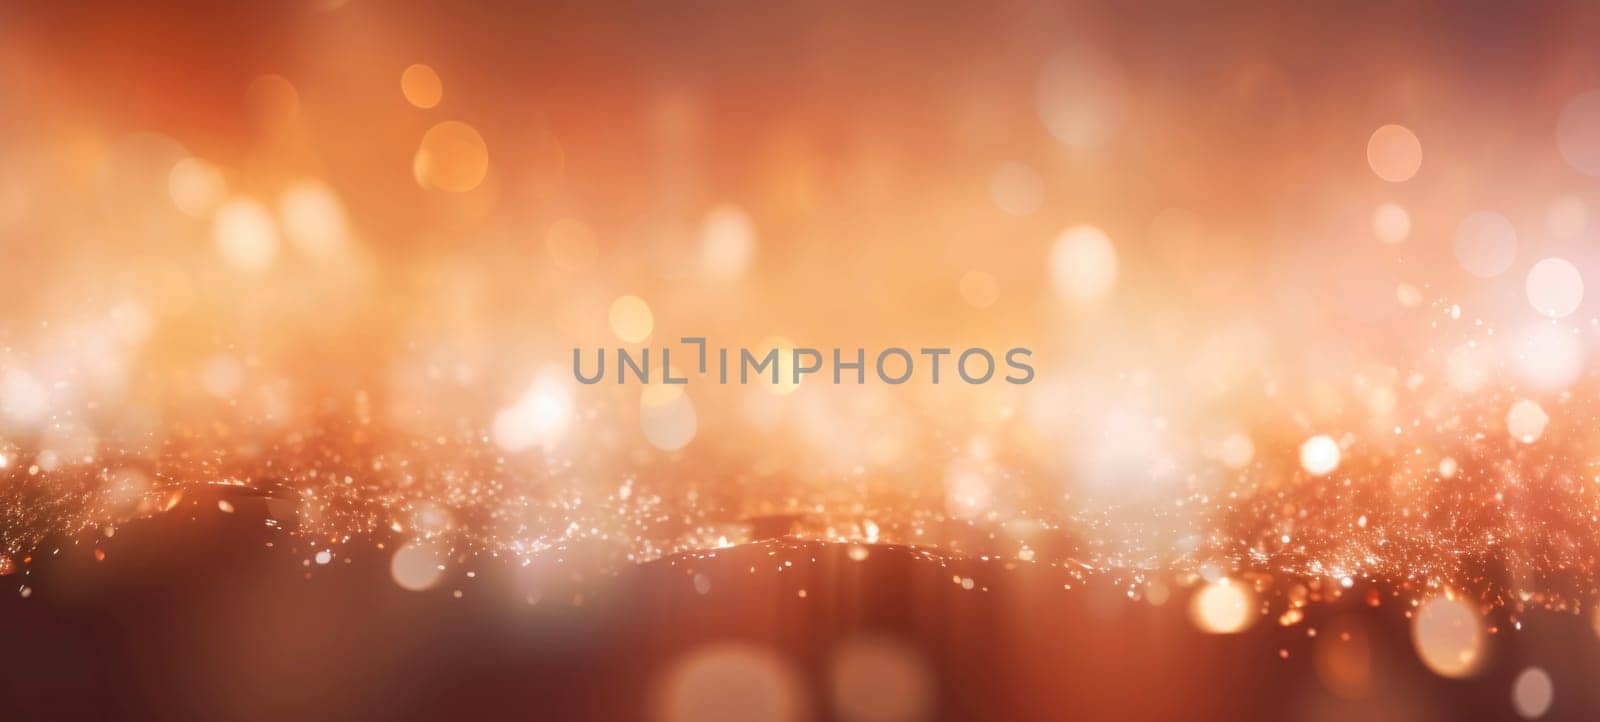 Abstract background with peach fuzz sparkles, shiny bokeh glitter lights by andreyz